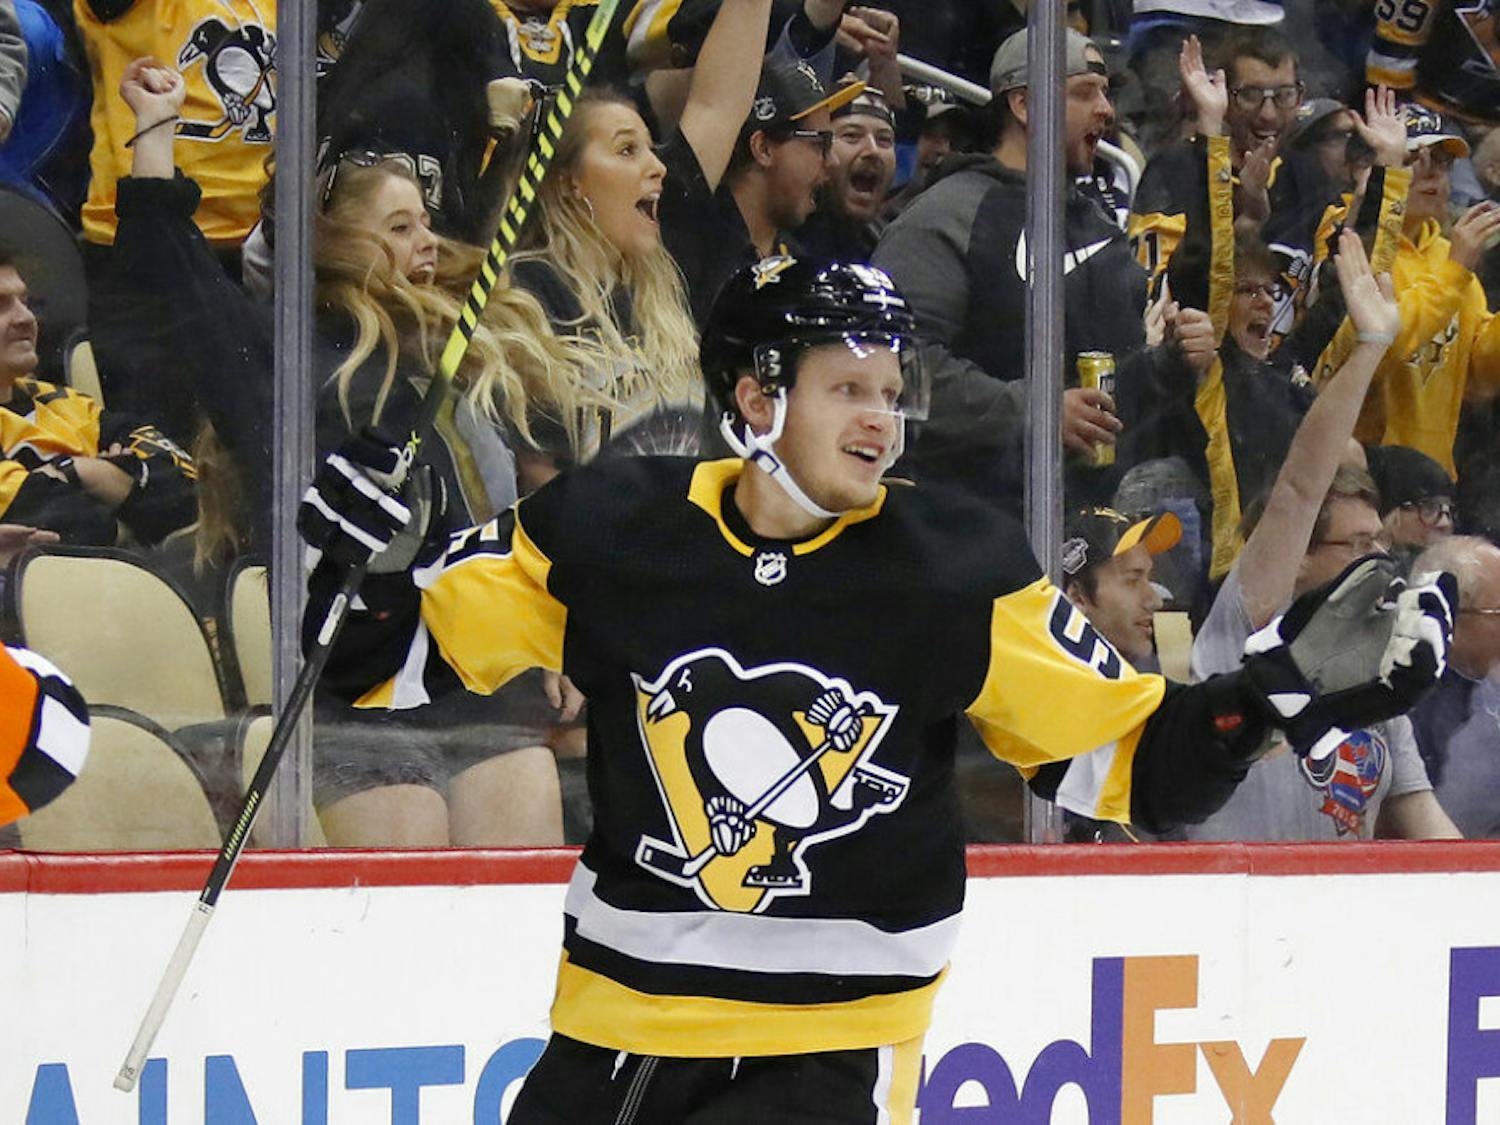 FILE - In this Oct. 16, 2019, file photo, Pittsburgh Penguins' Jake Guentzel celebrates after scoring during the second period of an NHL hockey game against the Colorado Avalanche in Pittsburgh. Guentzel feared his season was over thanks to a shoulder injury in December. The "pause" caused by the pandemic has given him renewed optimism that he will be ready when the playoffs hopefully being this summer. (AP Photo/Gene J. Puskar, File)